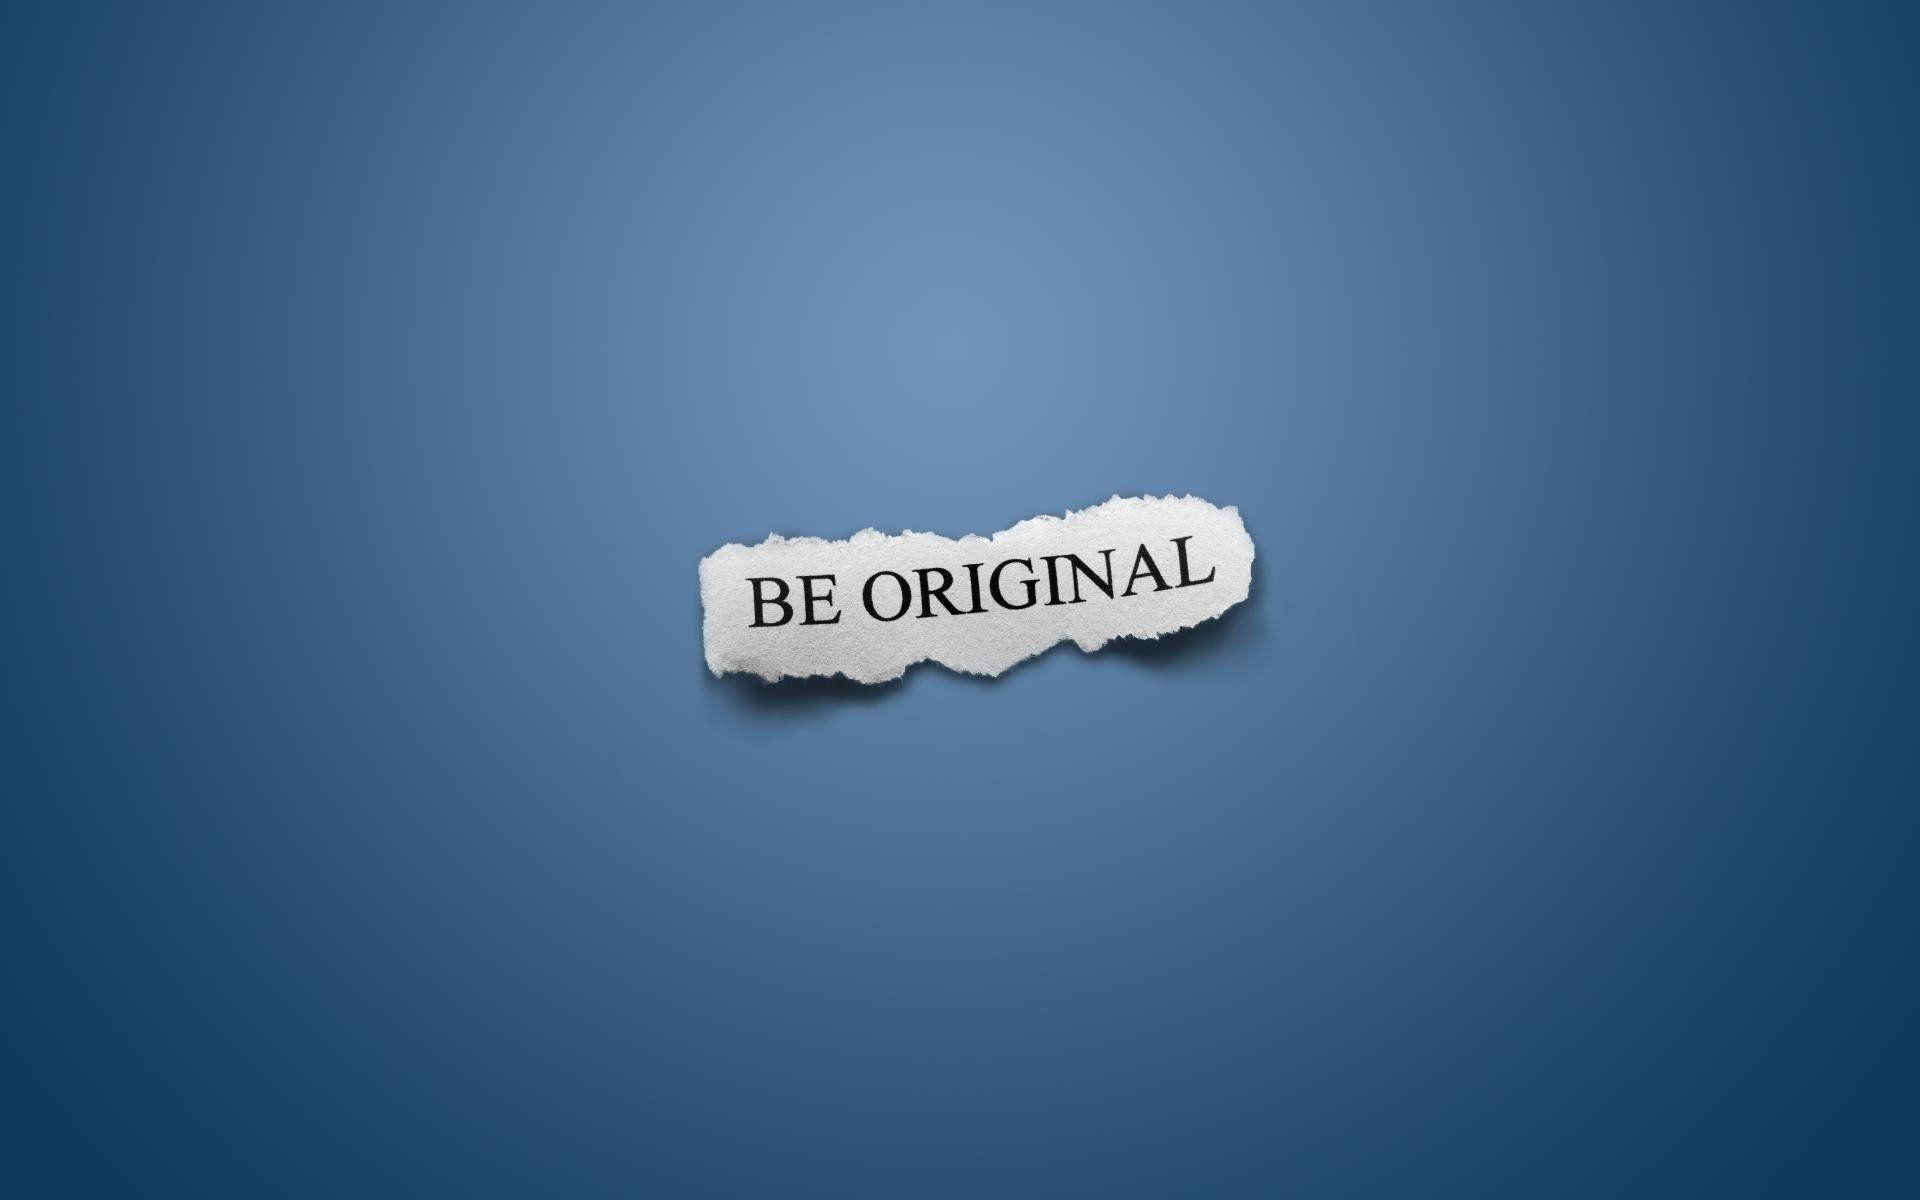 Motivational Hd Quote On Originality